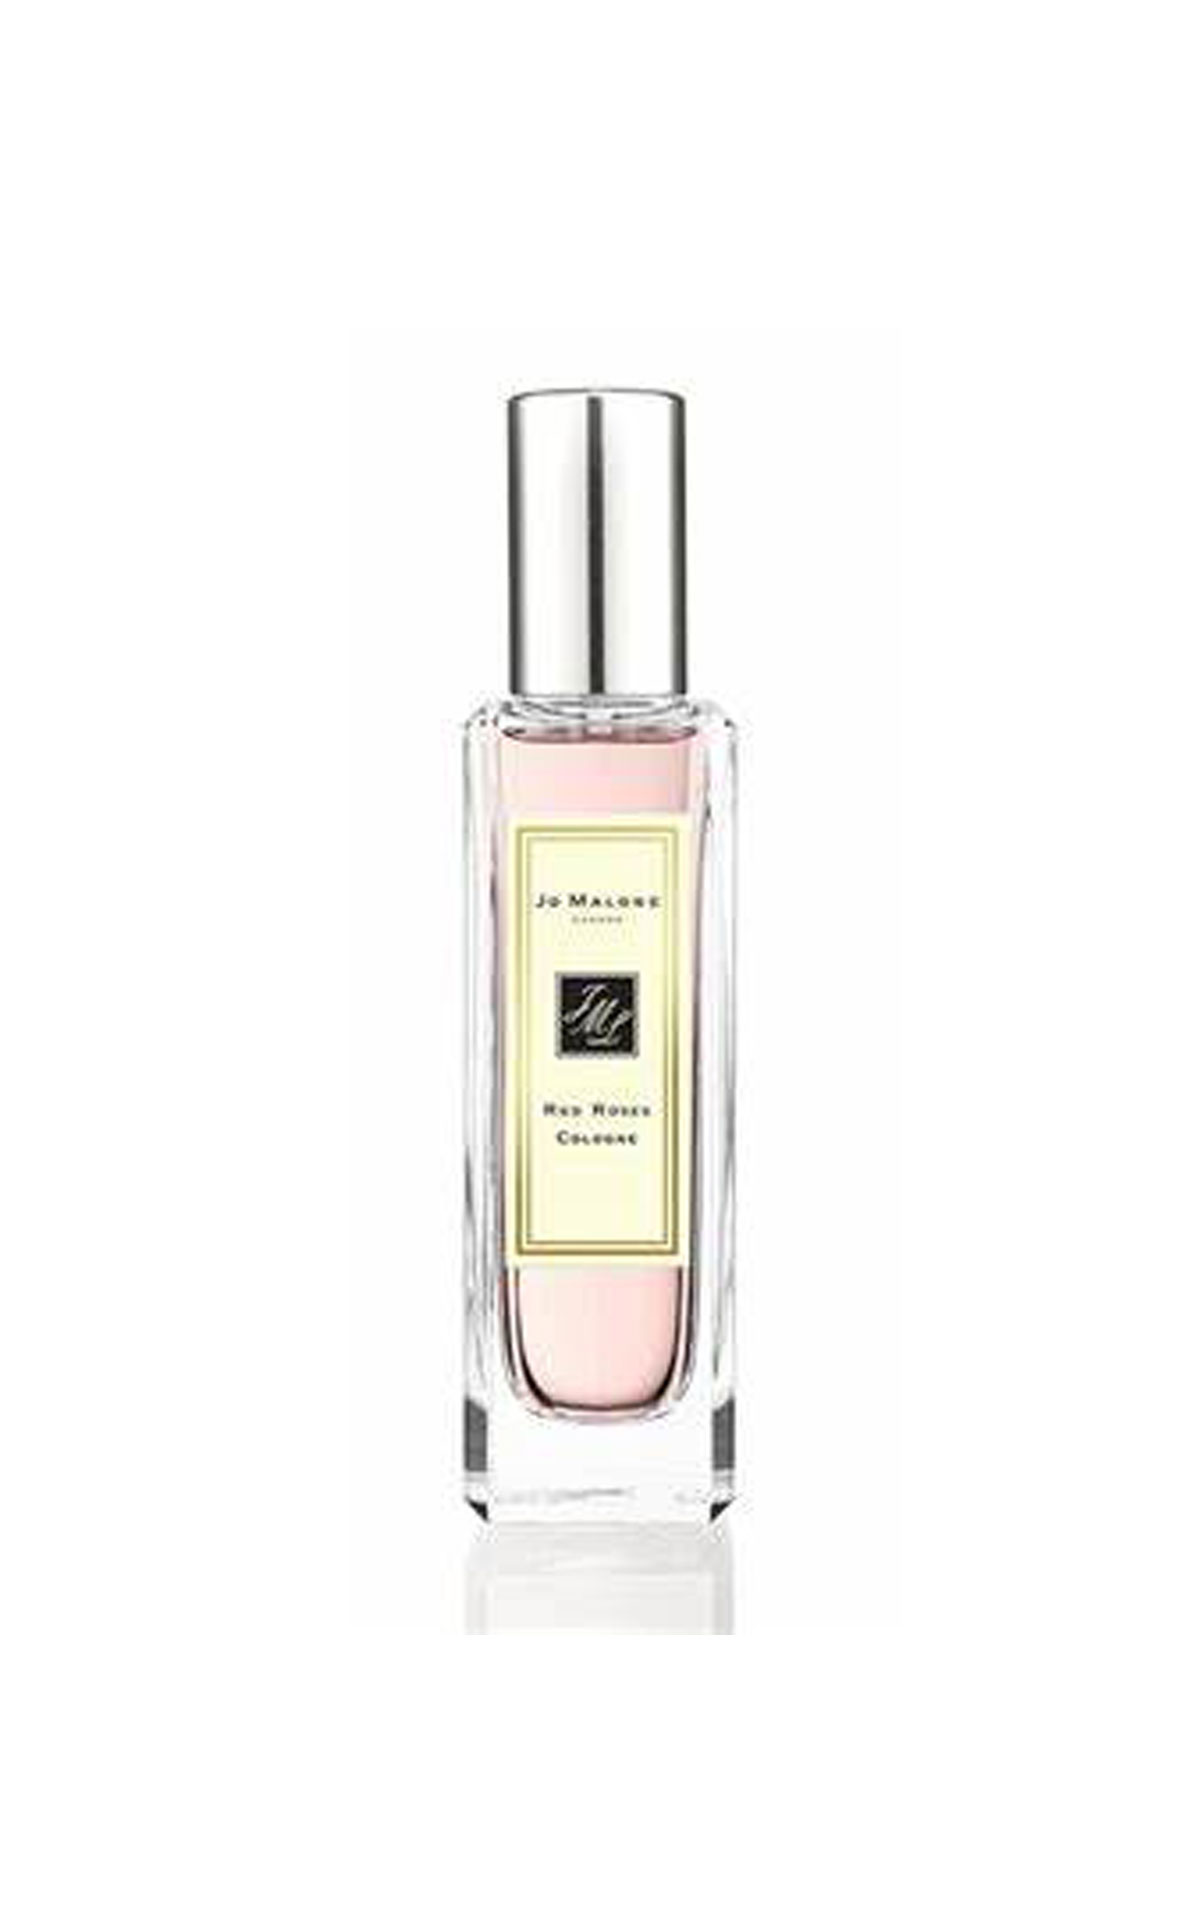 The Cosmetics Company Store Jo Malone London red roses 30ml cologne from Bicester Village